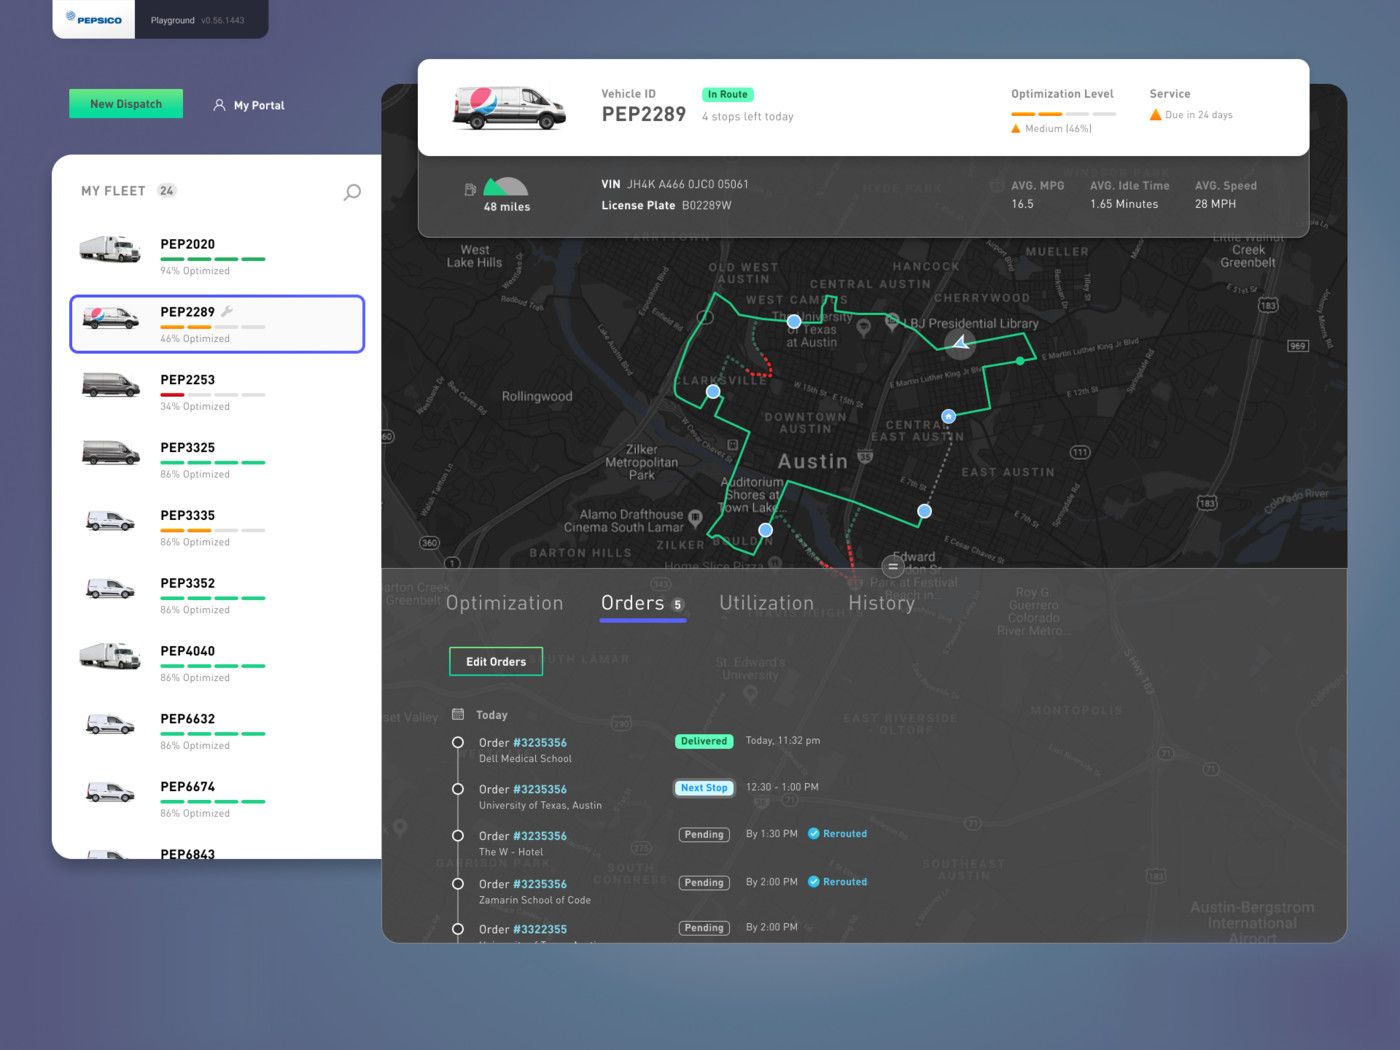 On this screen you can get the fullest info on your fleet (*image by [Brian Whitfield](https://dribbble.com/brianwhitfield){ rel="nofollow" .default-md}*)